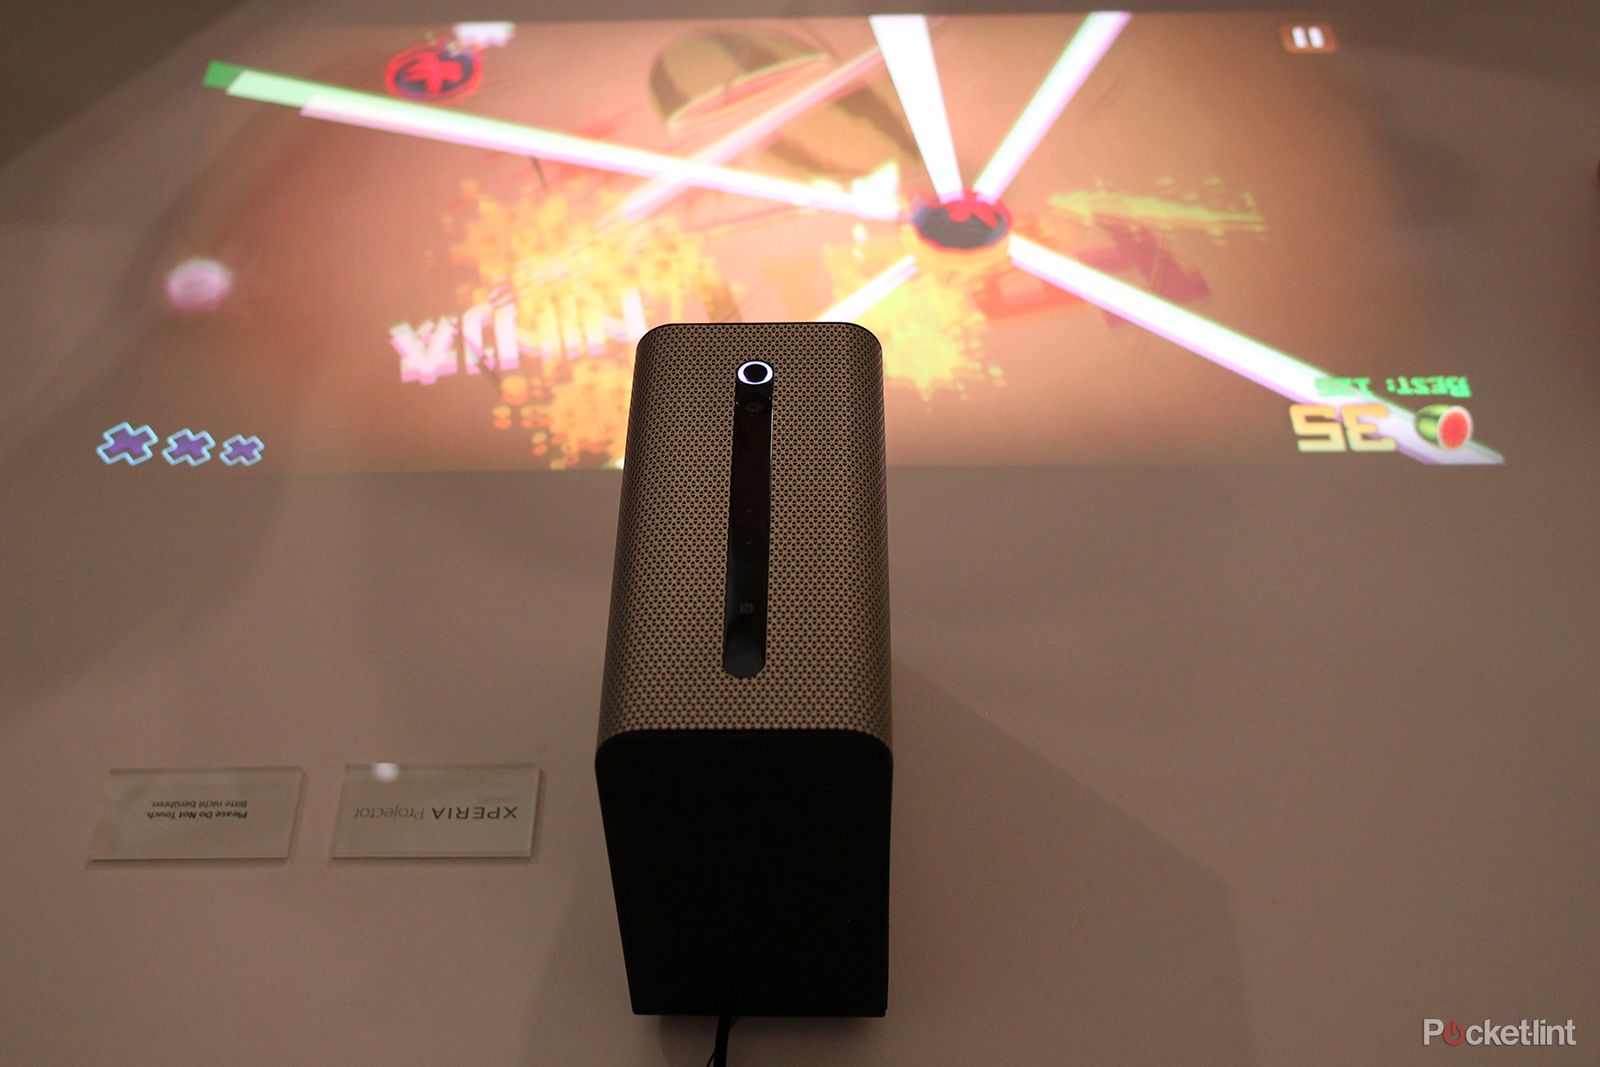 sony xperia projector concept will let you play candy crush on the kitchen table image 1